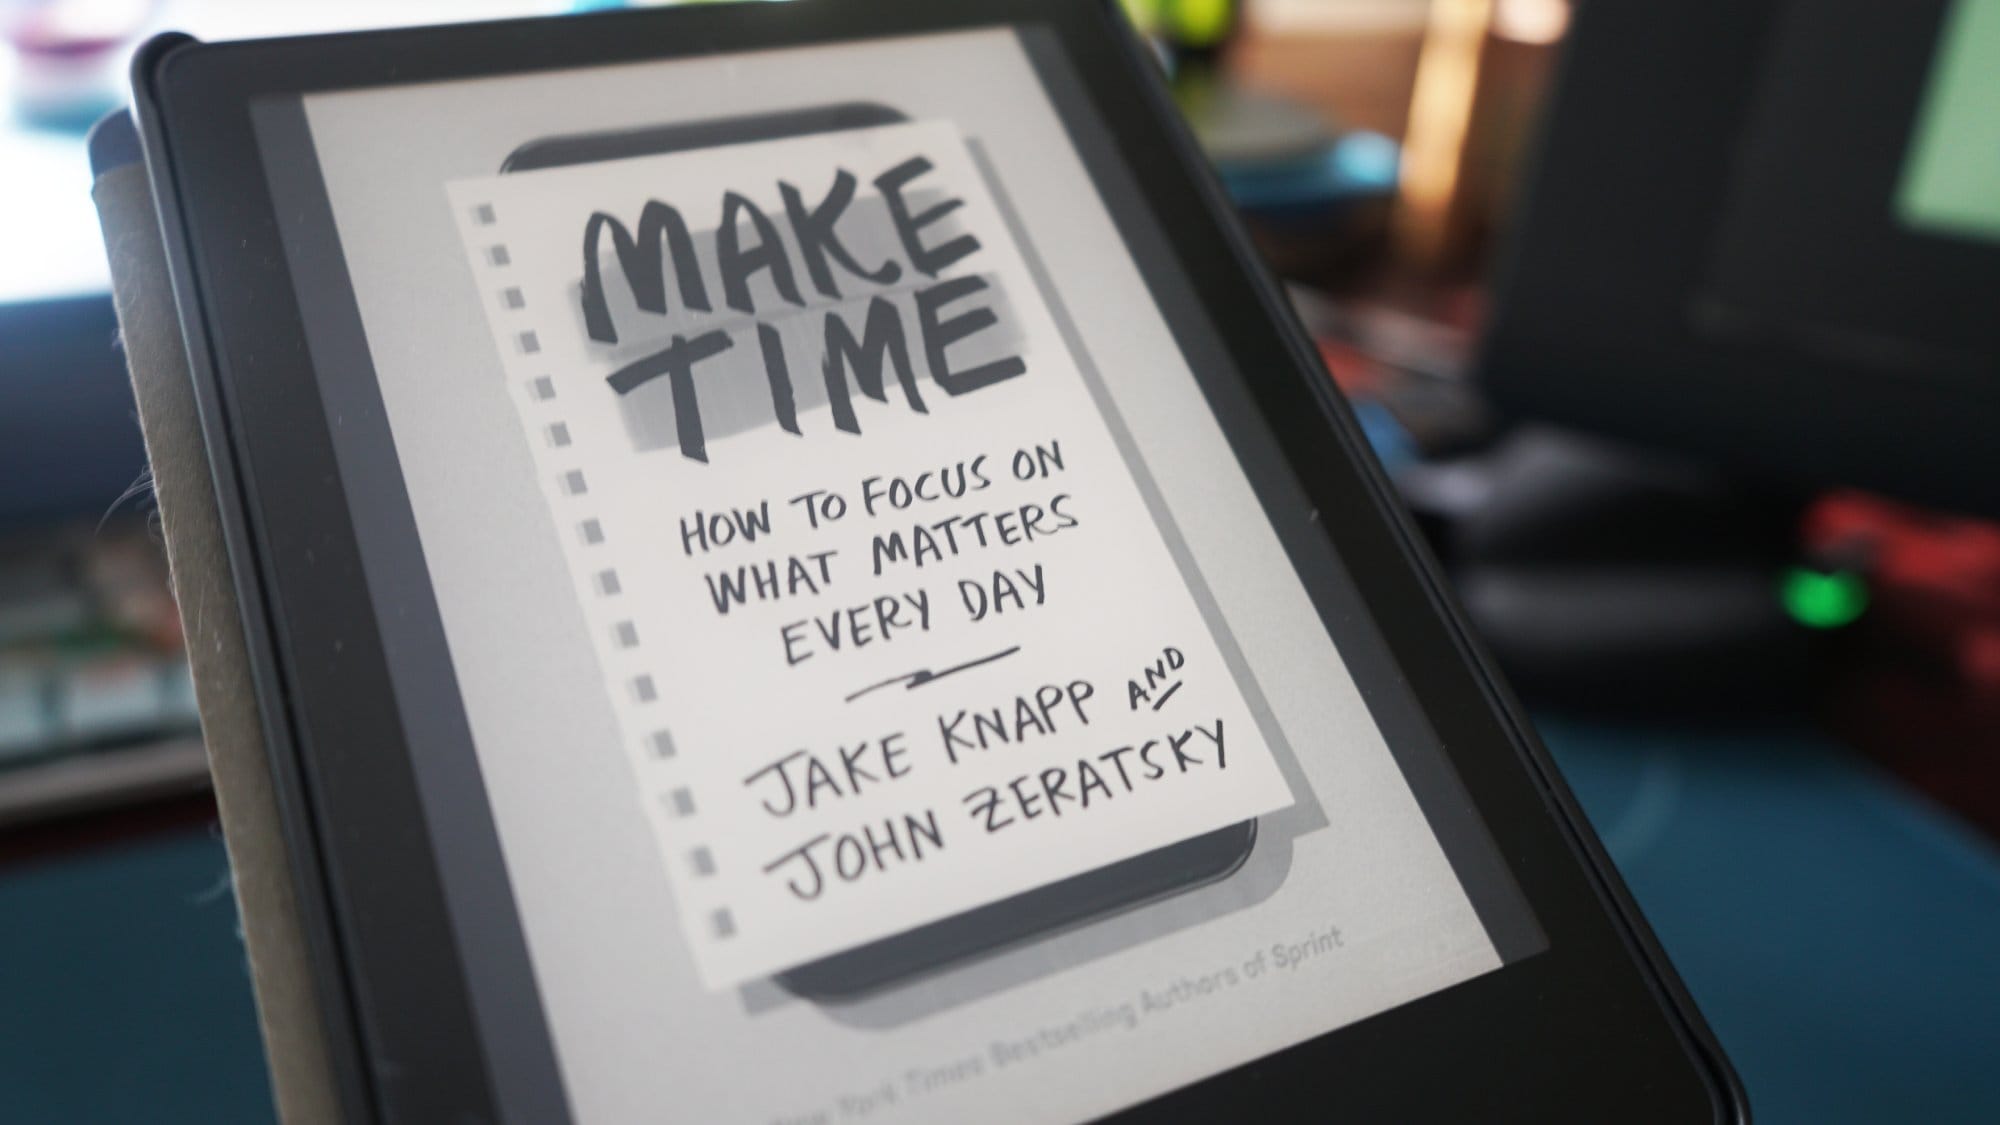 An e-reader screen displaying the cover of the book “Make Time: How to Focus on What Matters Every Day” by Jake Knapp and John Zeratsky